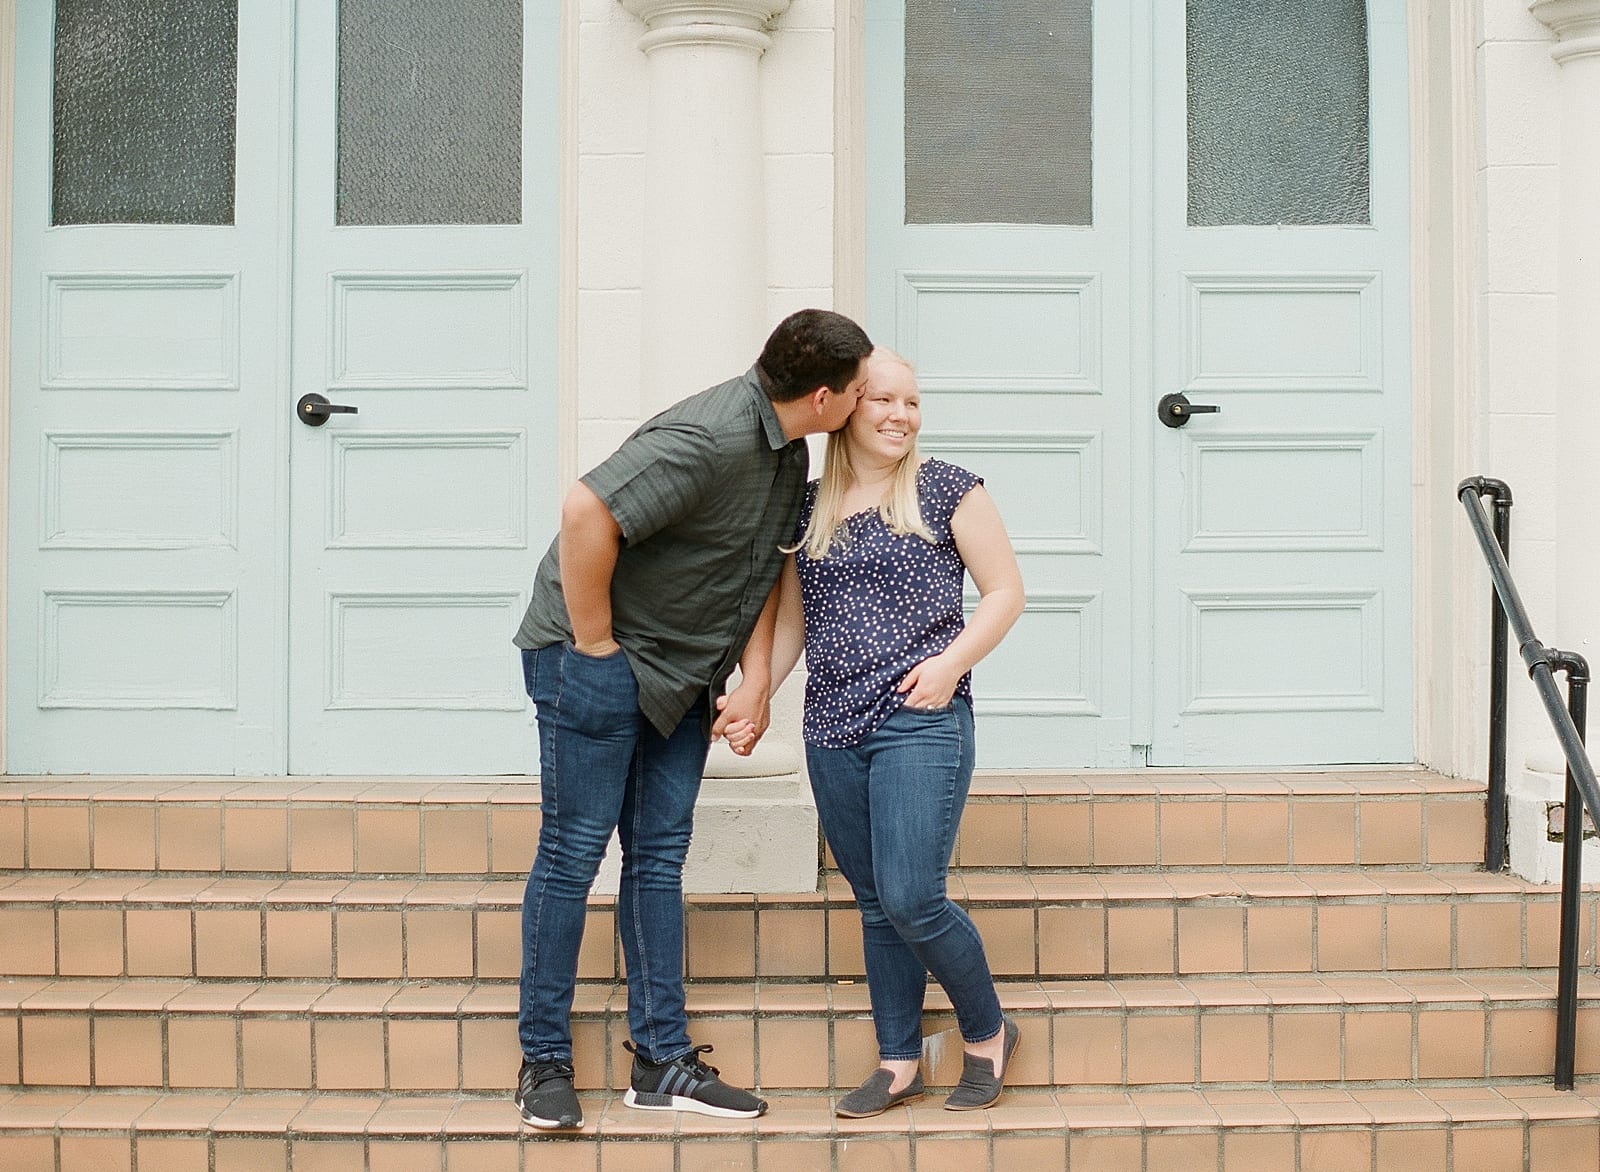 Downtown Raleigh NC Engagement Session Couple on Stairs Photo